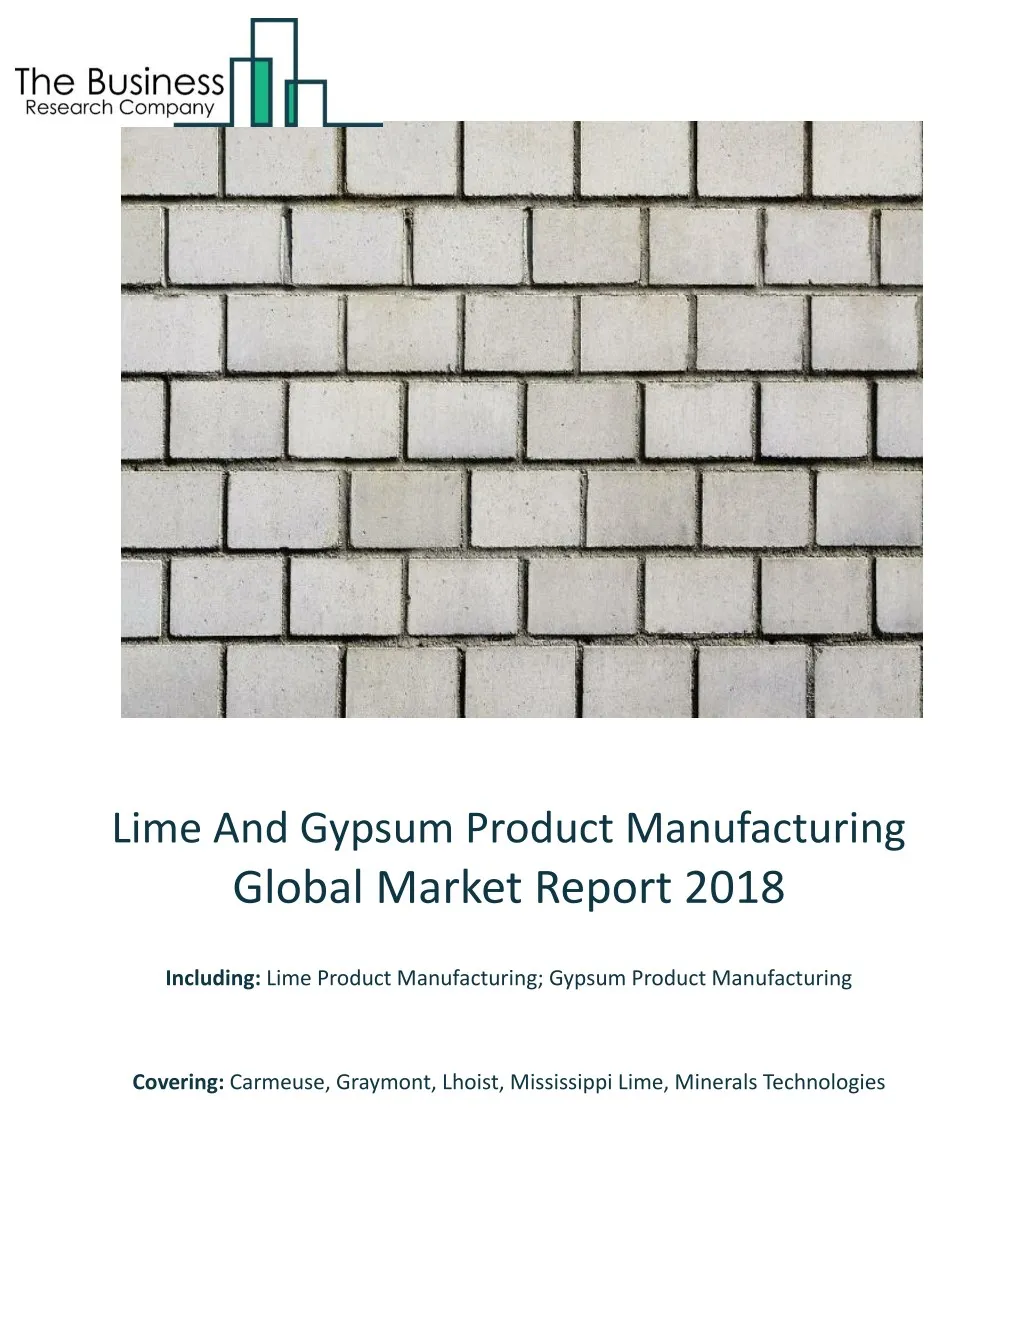 lime and gypsum product manufacturing global